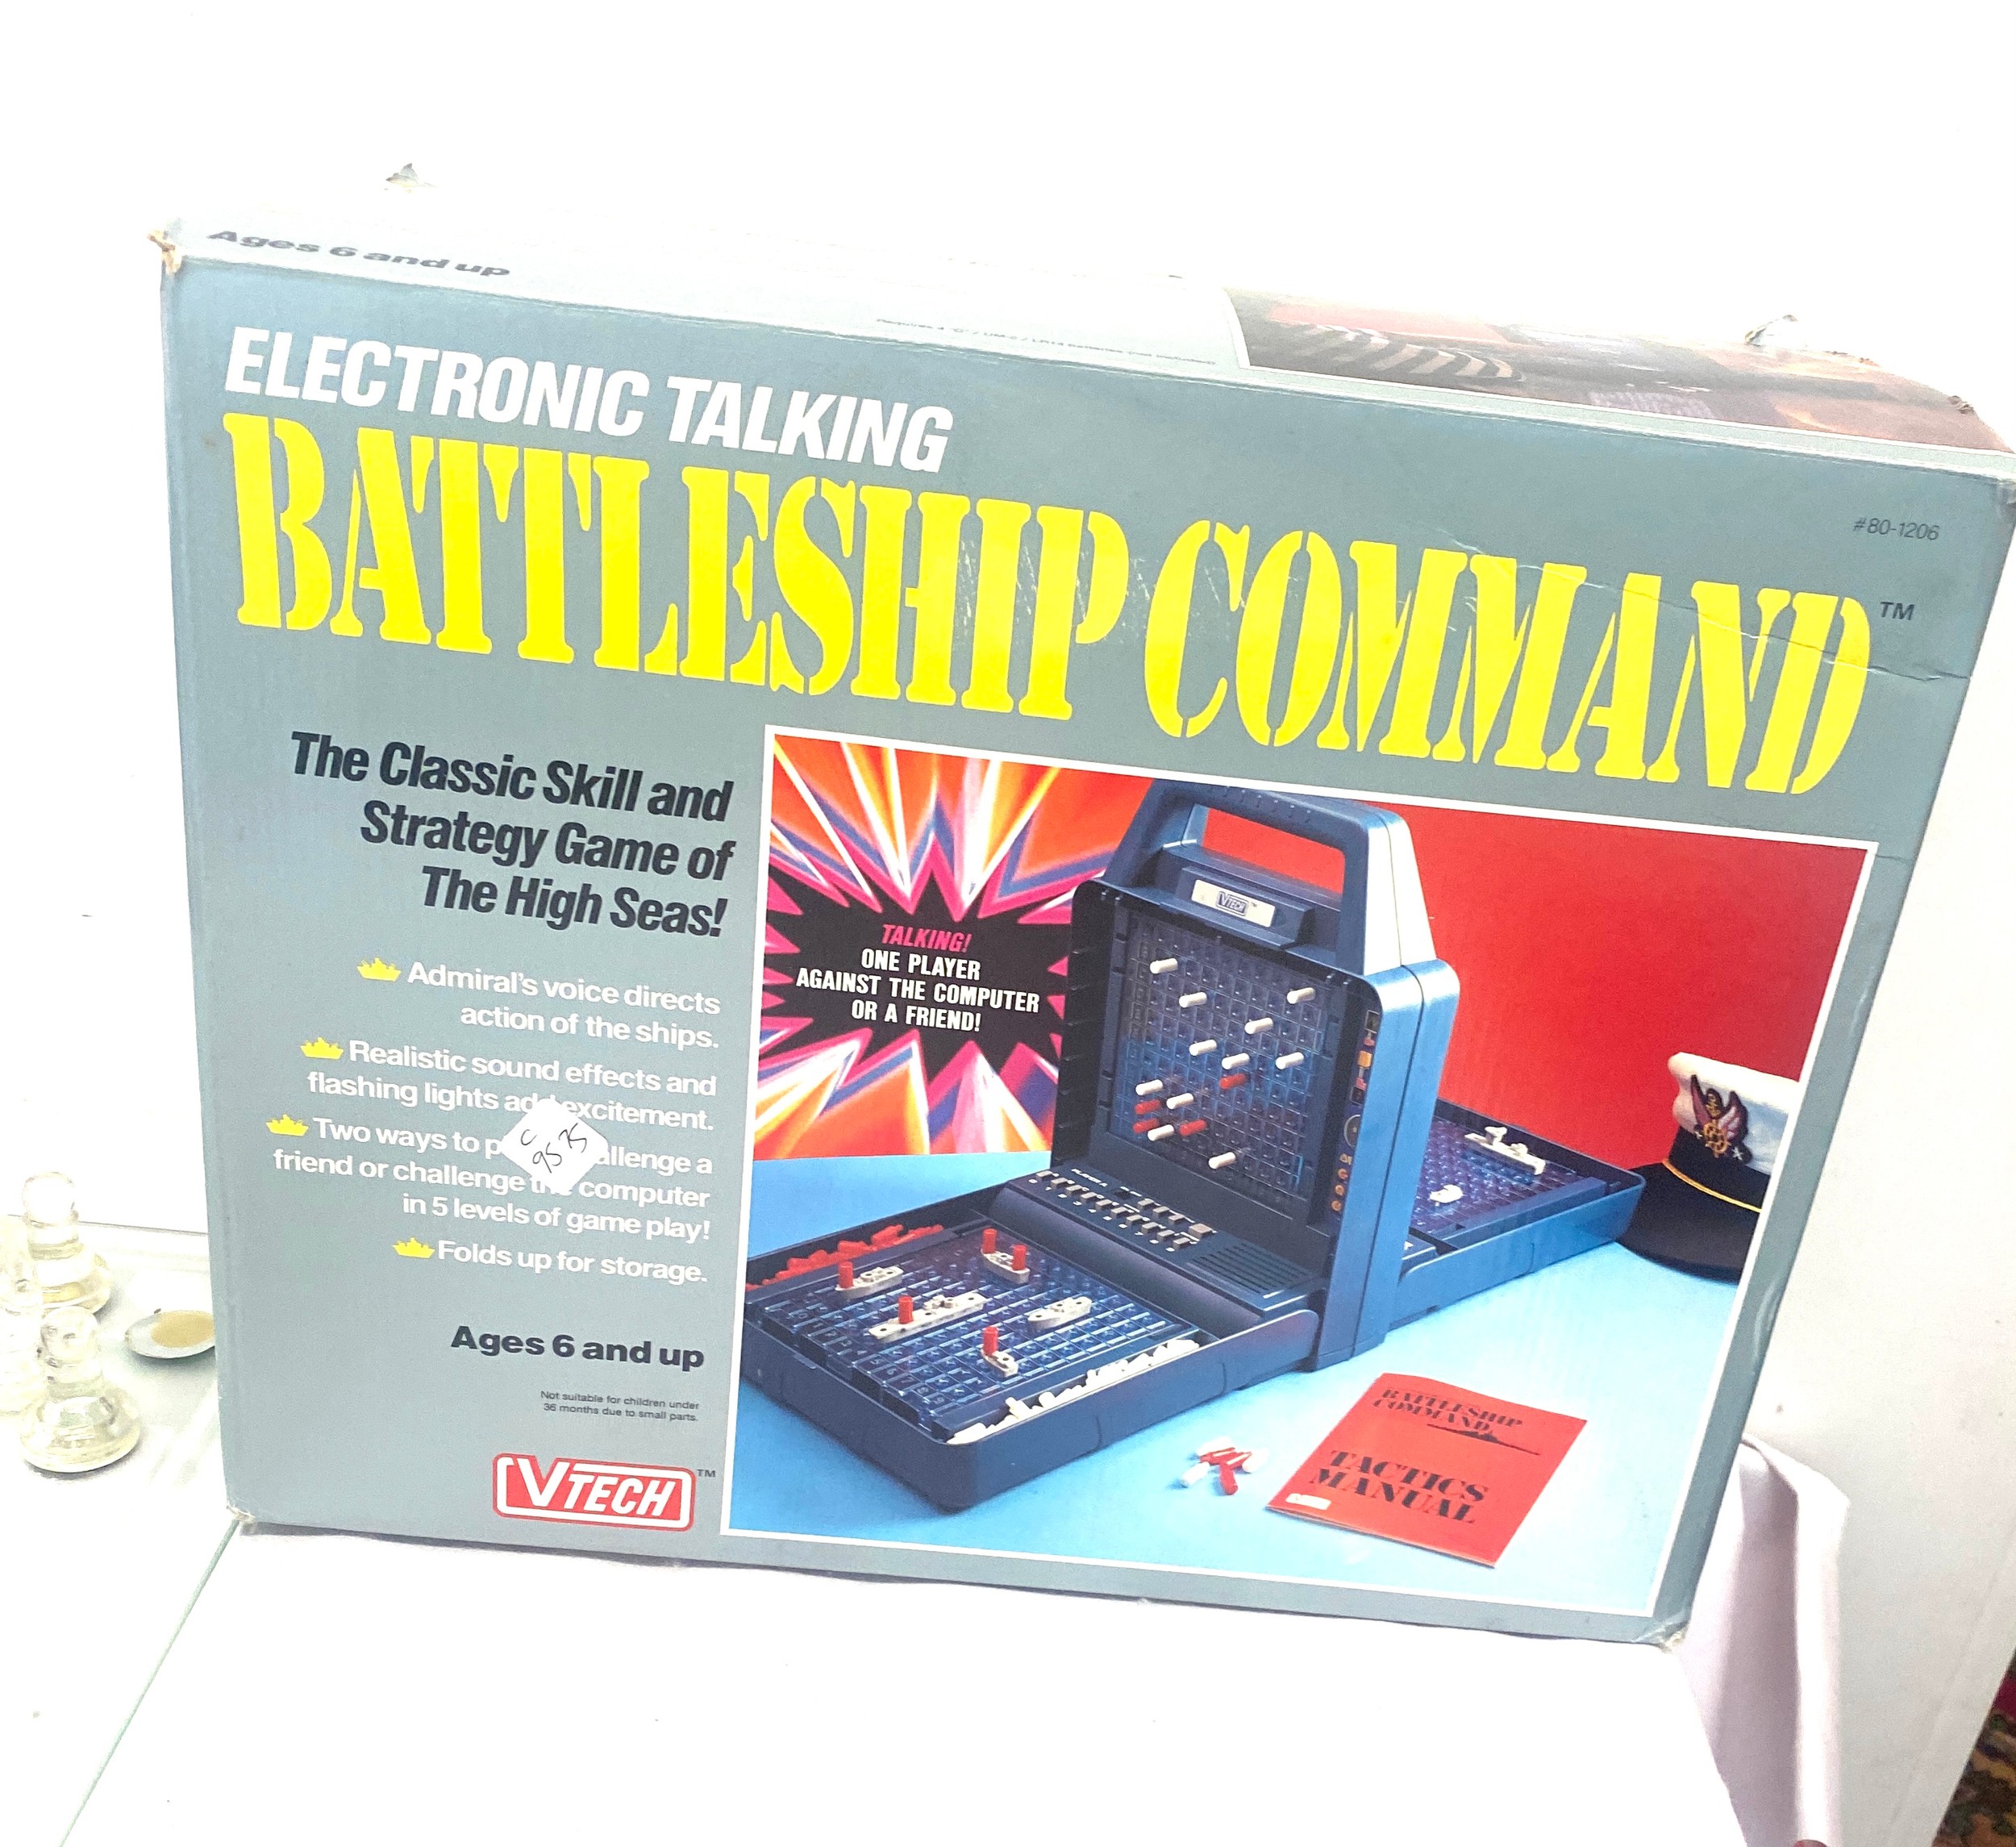 VTech Battleship Command - Electronic Talking Vintage/Retro 1990 Game and complete glass chest board - Image 3 of 5